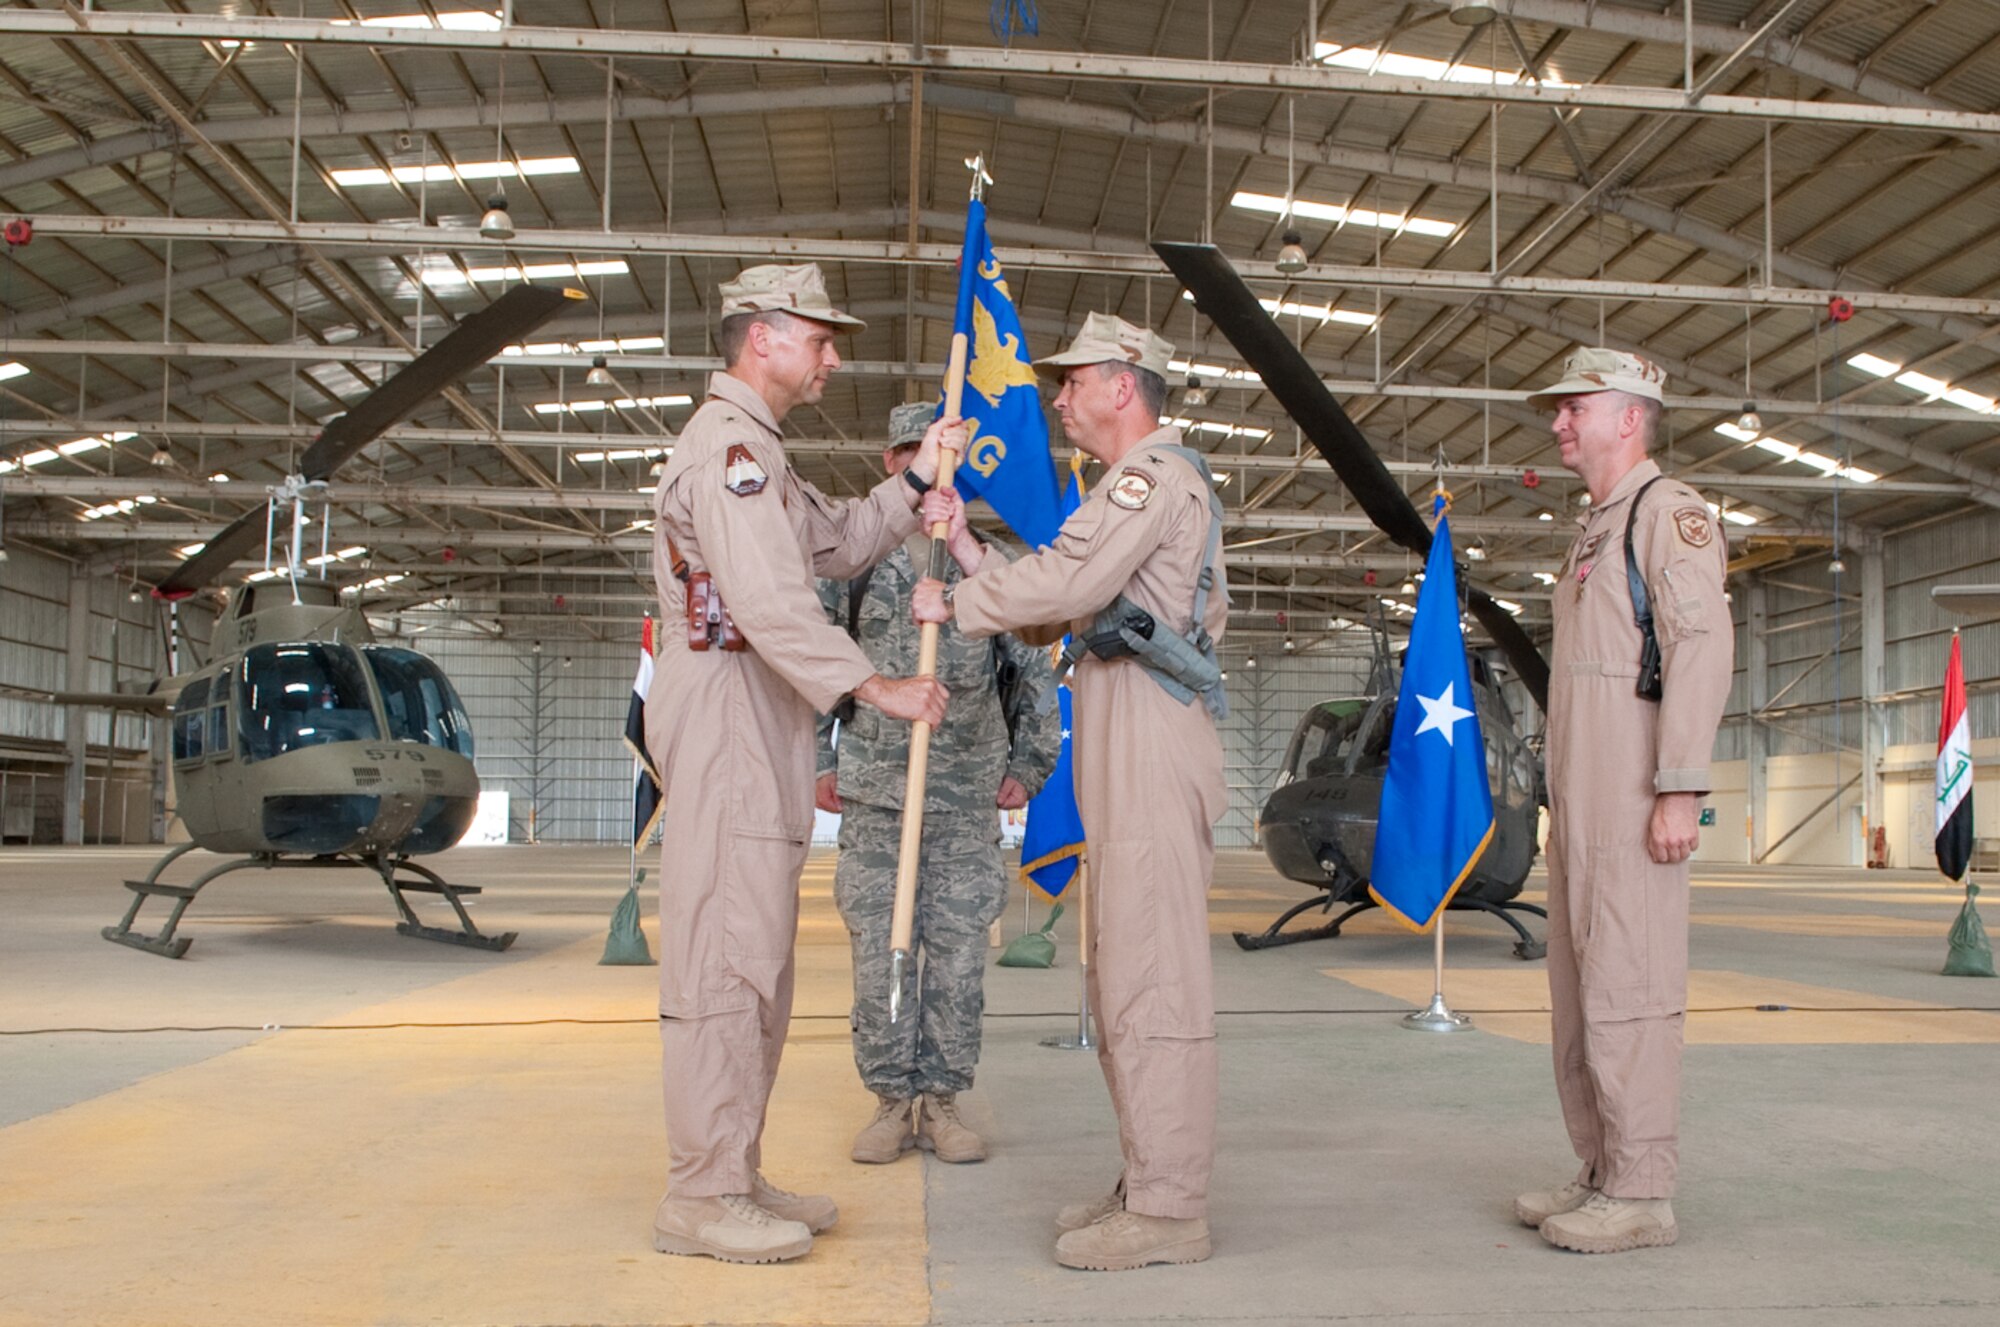 Col. Shaun Turner assumes command of the 321st Air Expeditionary Advisory Group and receives  the guidon from Brig. Gen. Scott Hanson, commander, 321st Air Expeditionary Wing, and director, Iraqi Training Advisory Mission-Air Force, during the change of command ceremony at Kirkuk Regional Air Base, Iraq, June 14, 2010. The group consists of three advisory squadrons, two military training teams and a group staff operating at four locations in Iraq. 